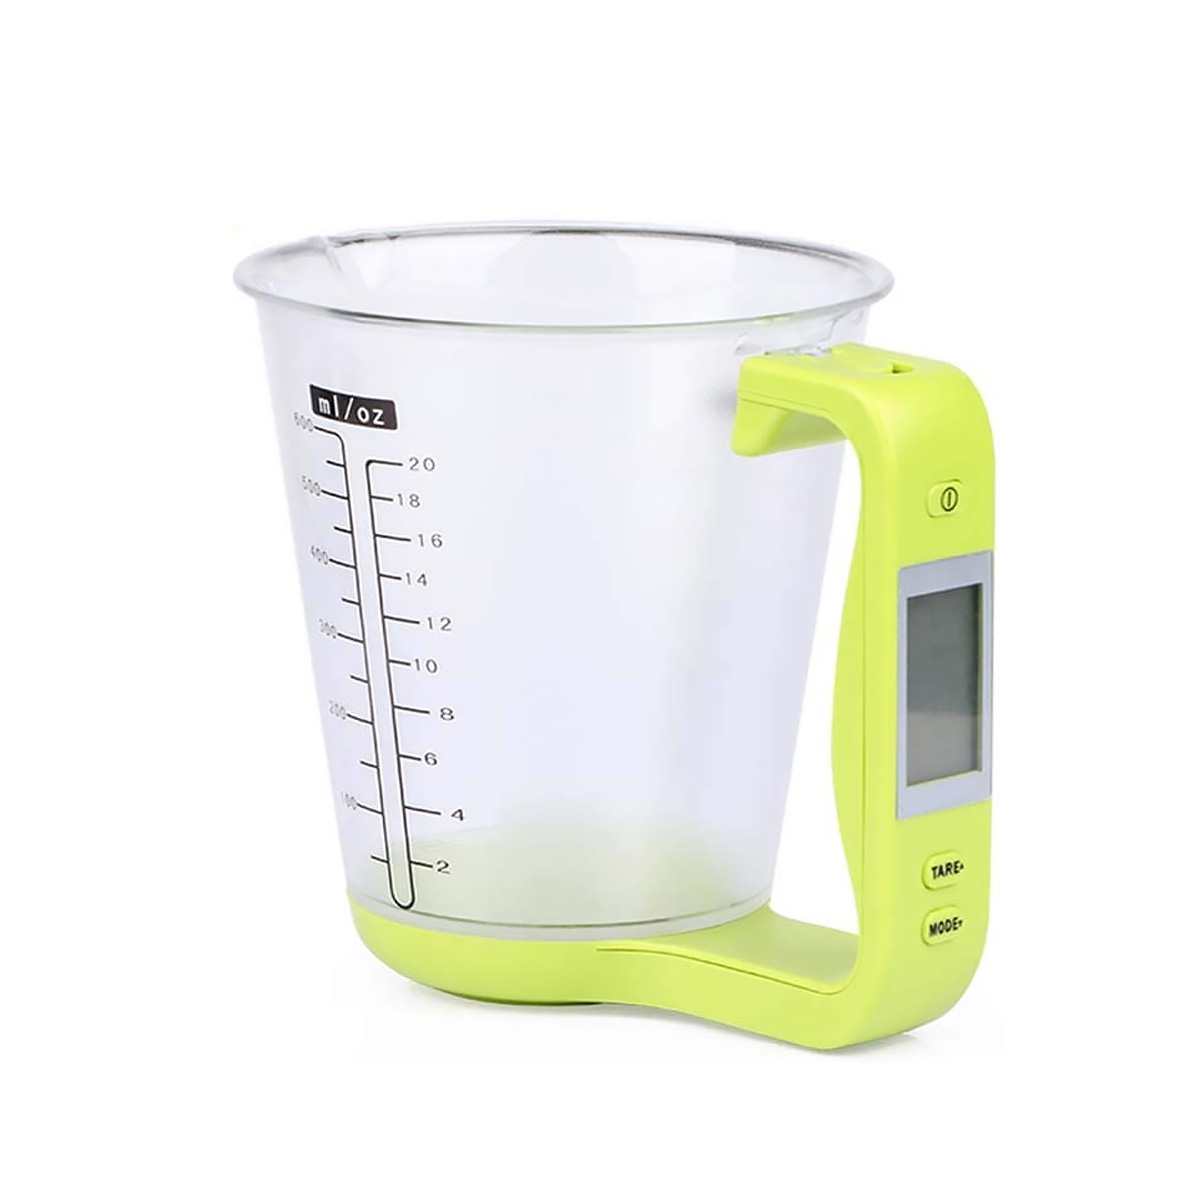 Electronic-Scale-Measuring-Cup-Auto-Power-Off-Electronic-Scale-Large-Capacity-LCD-Digital-Measuring--86136-18